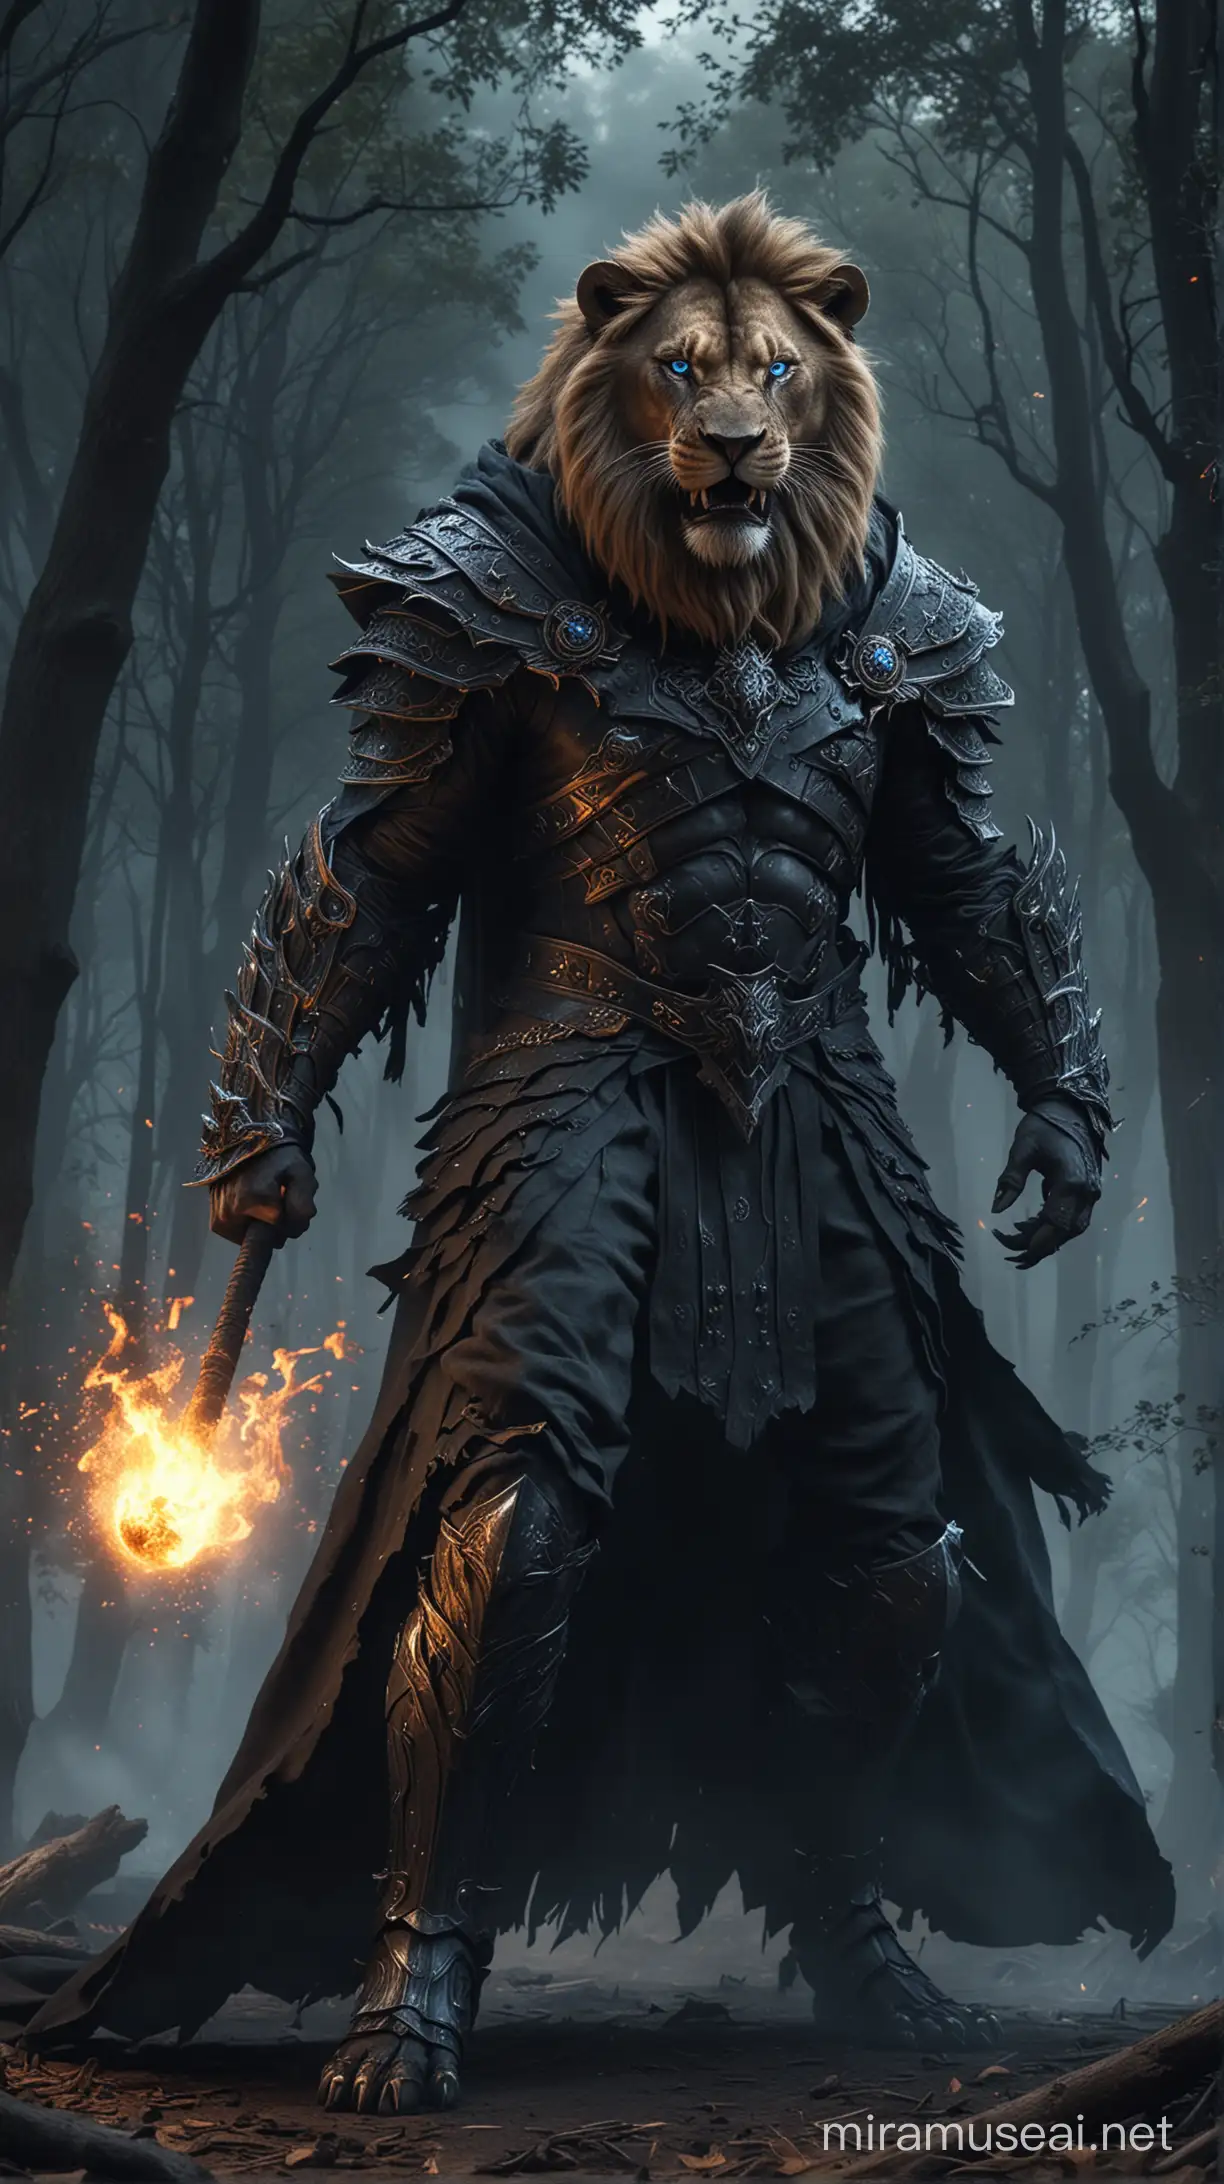 fictional figure of a human lion, blazing blue eyes, sharp fangs, wearing a black battle robe, epic design, detailed, complicated and elegant, burning on fire, dashing, strong, scary, sturdy legs, sharp claws, standing between trees lush,forest background.full moon night,smoke effect covering,mystical,strong anigmatic style,opening his mouth,highest definition hyperrealistic.